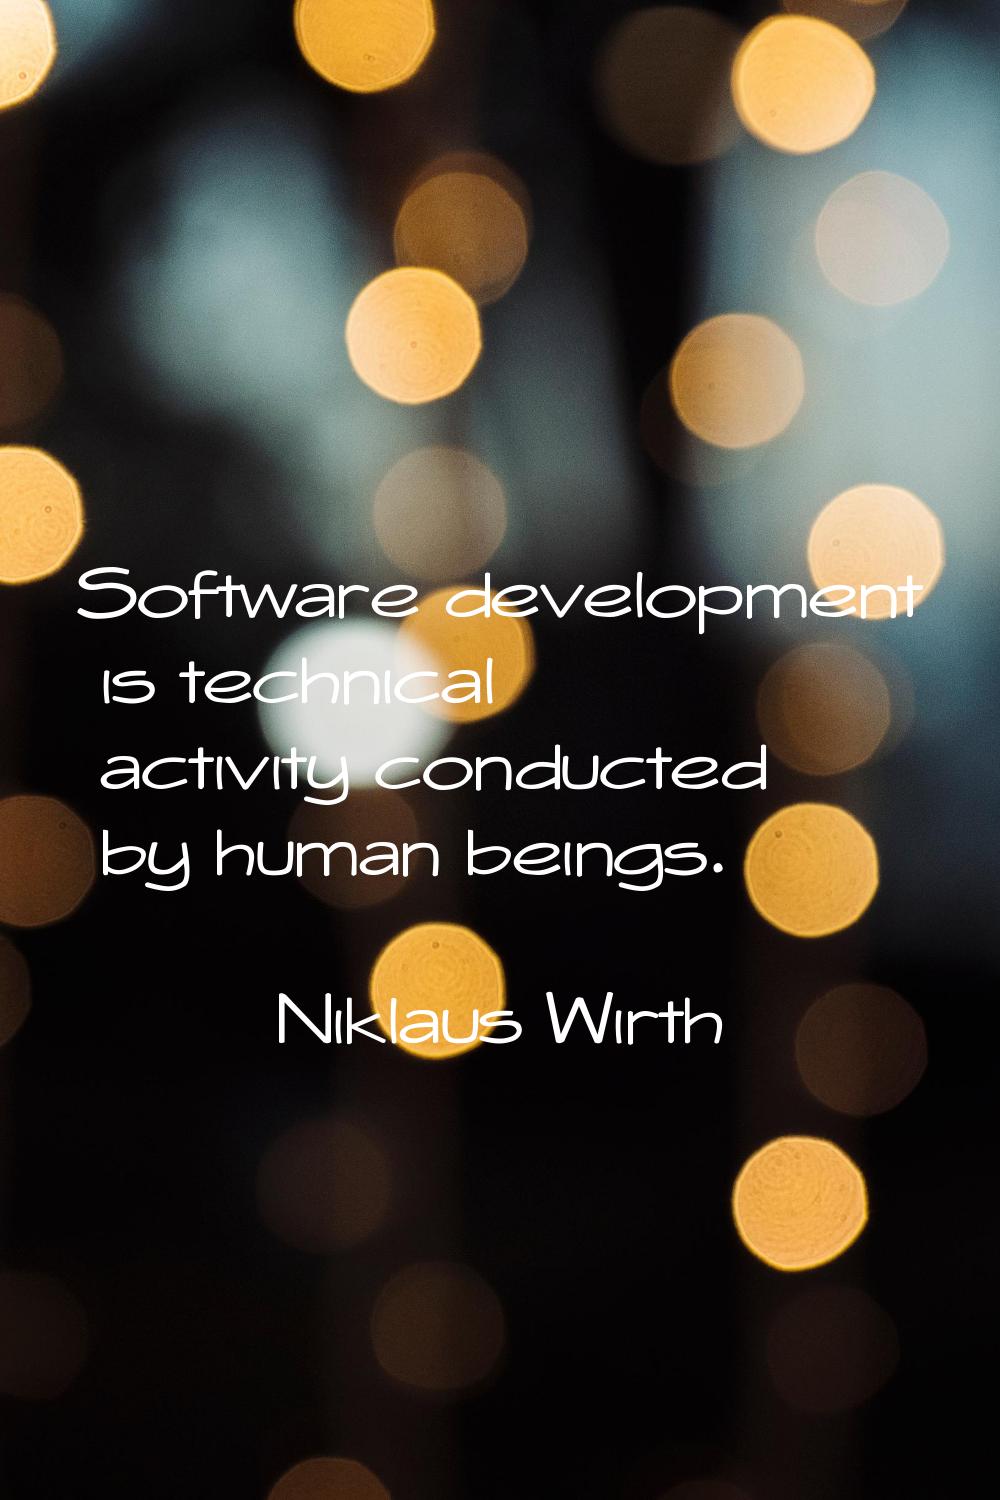 Software development is technical activity conducted by human beings.